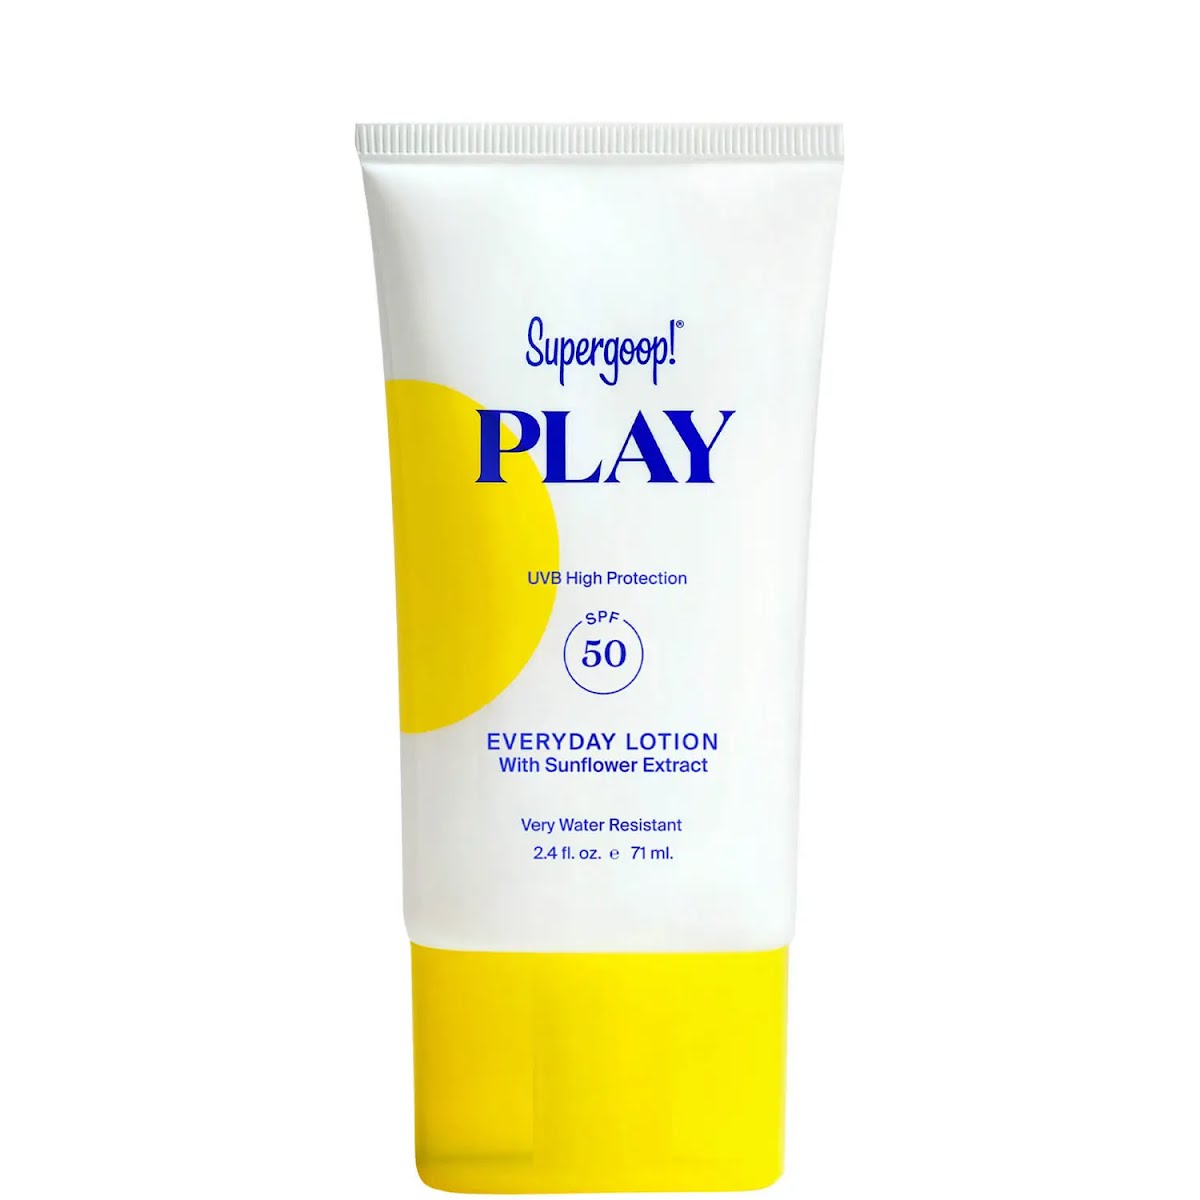 Supergoop! Play Everyday Lotion SPF 50 with Sunflower Extract, €22.60